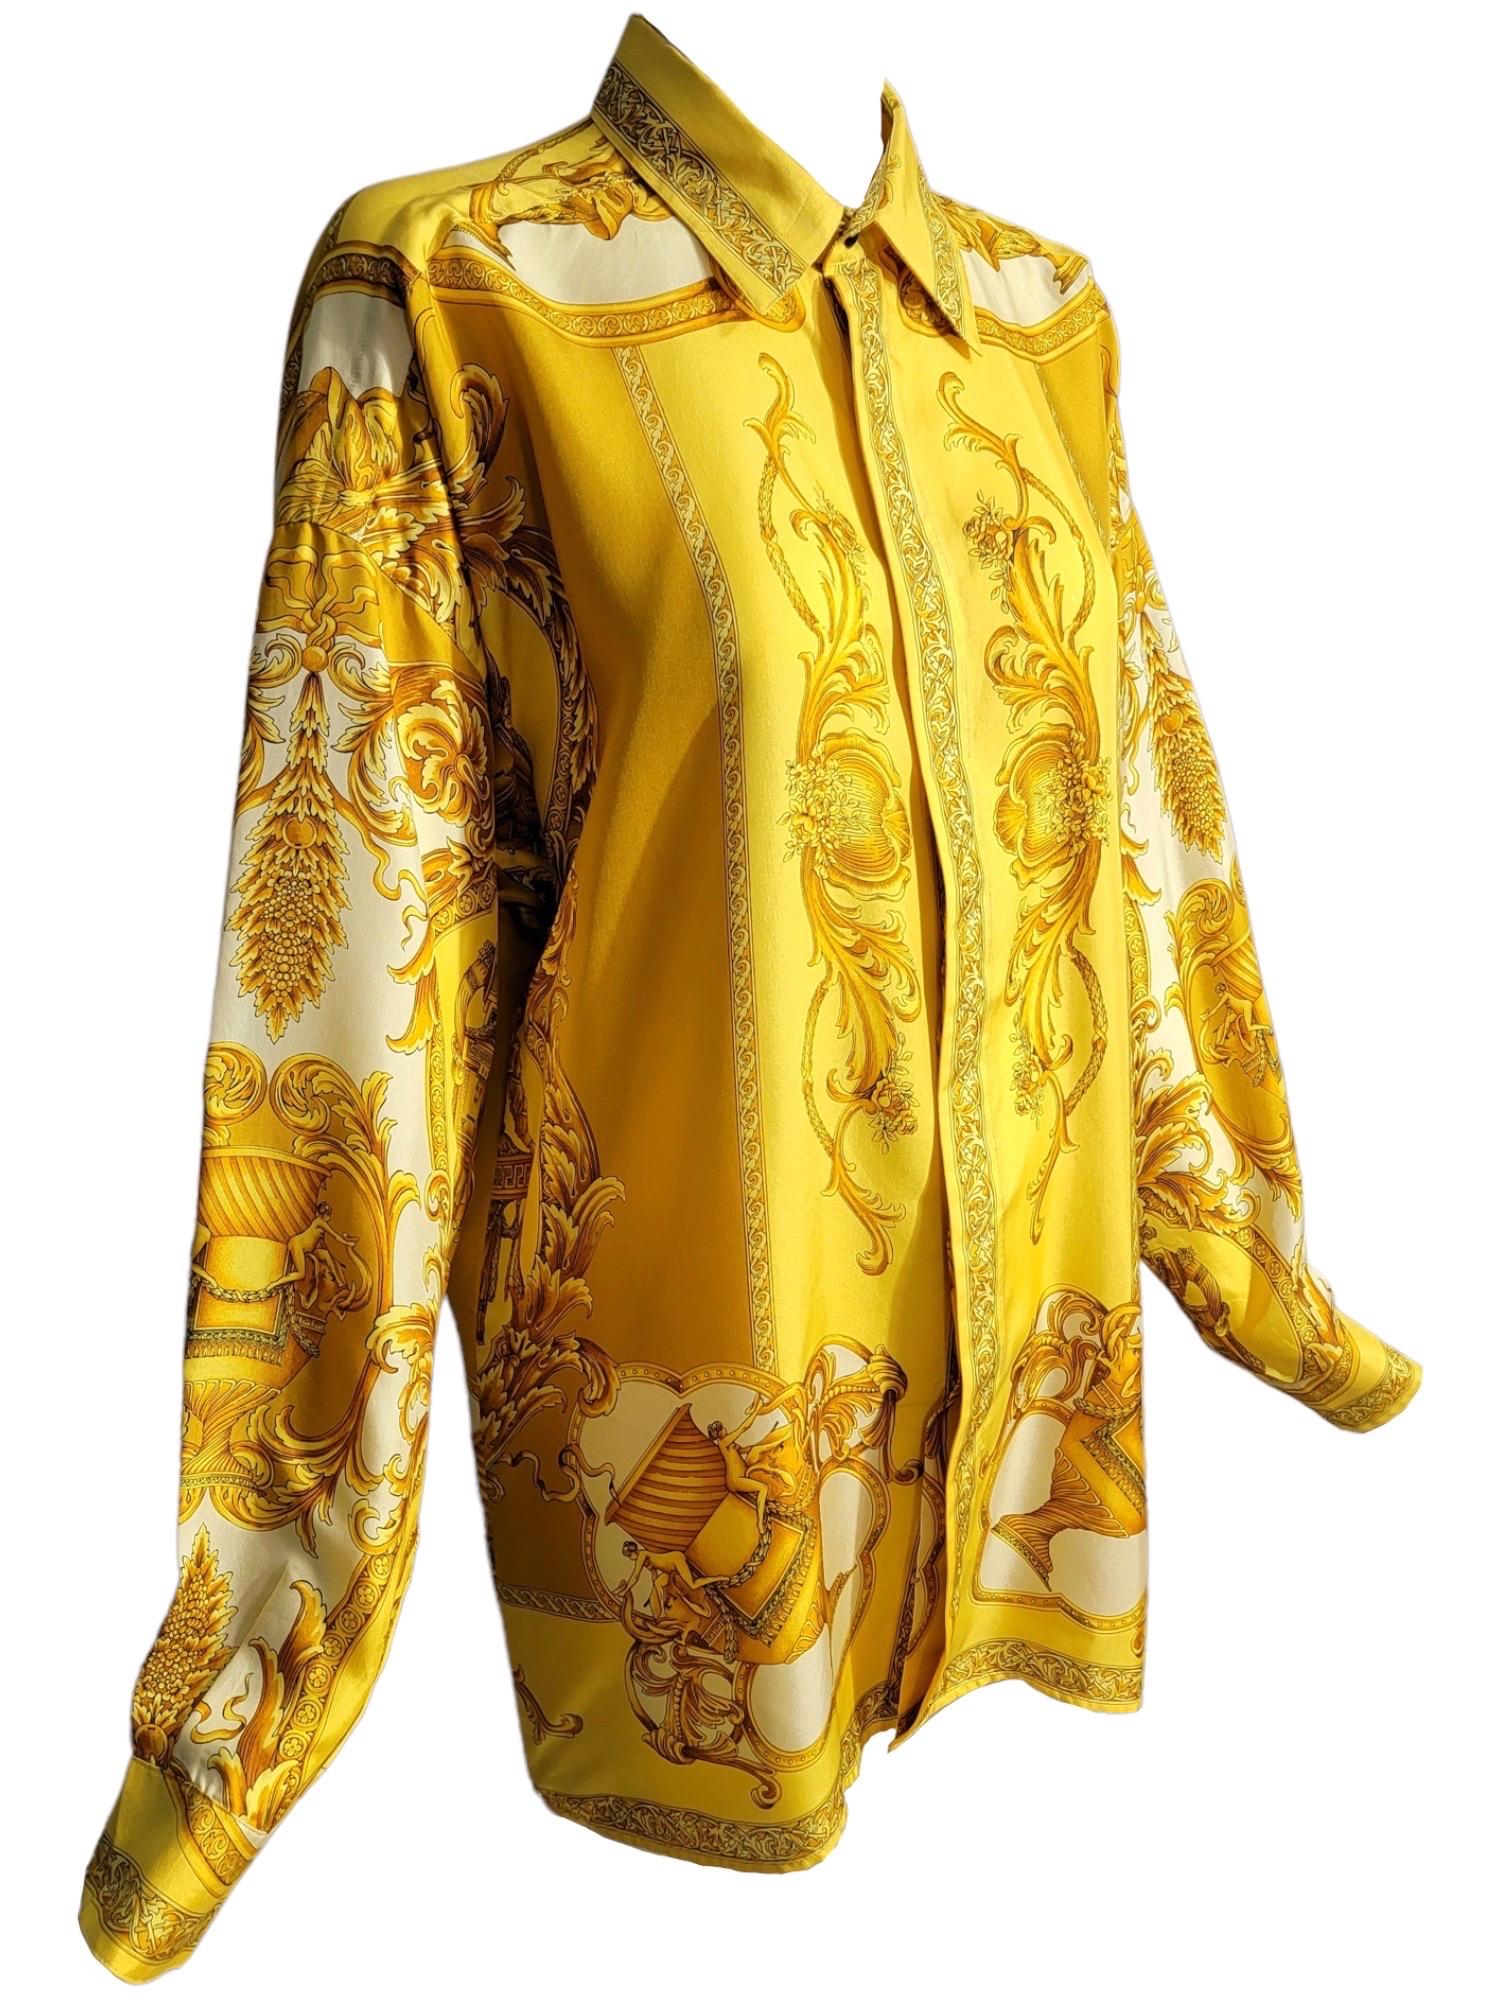 Gianni Versace Rococo Silk Shirt Men’s IT48 from 1995 For Sale 1